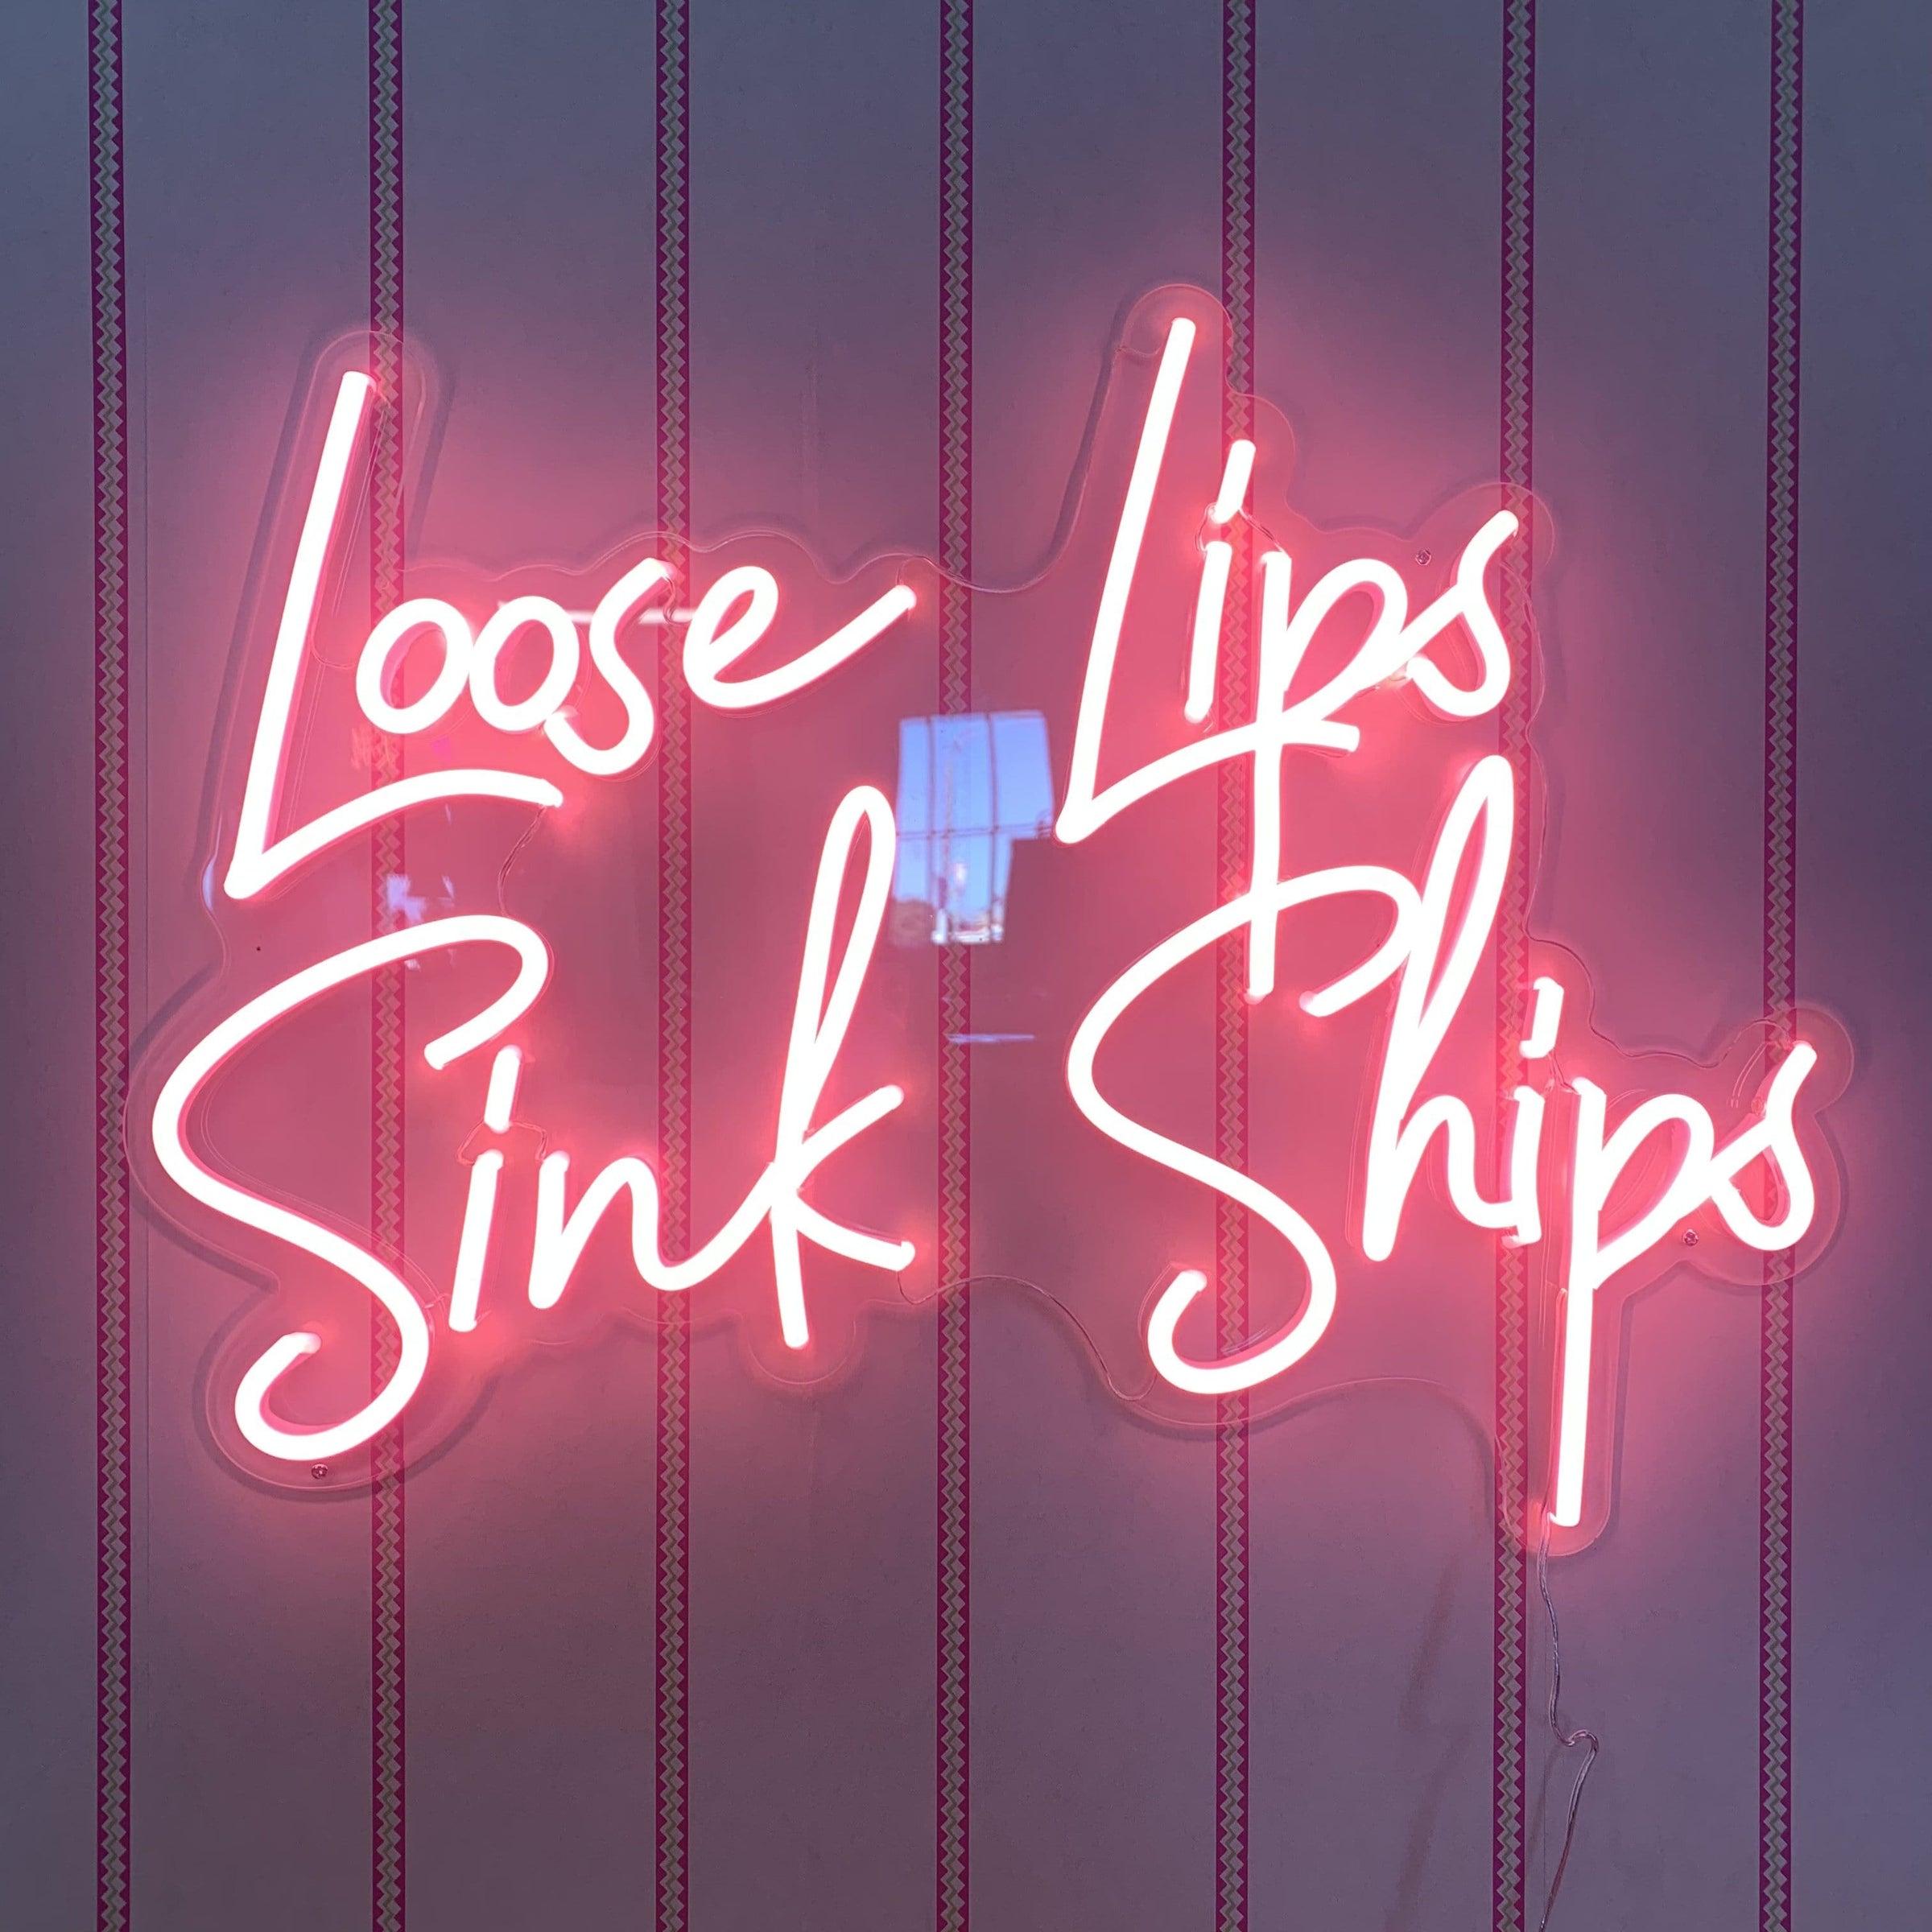 Loose Lips Sink Ships - Pink Neon Sign